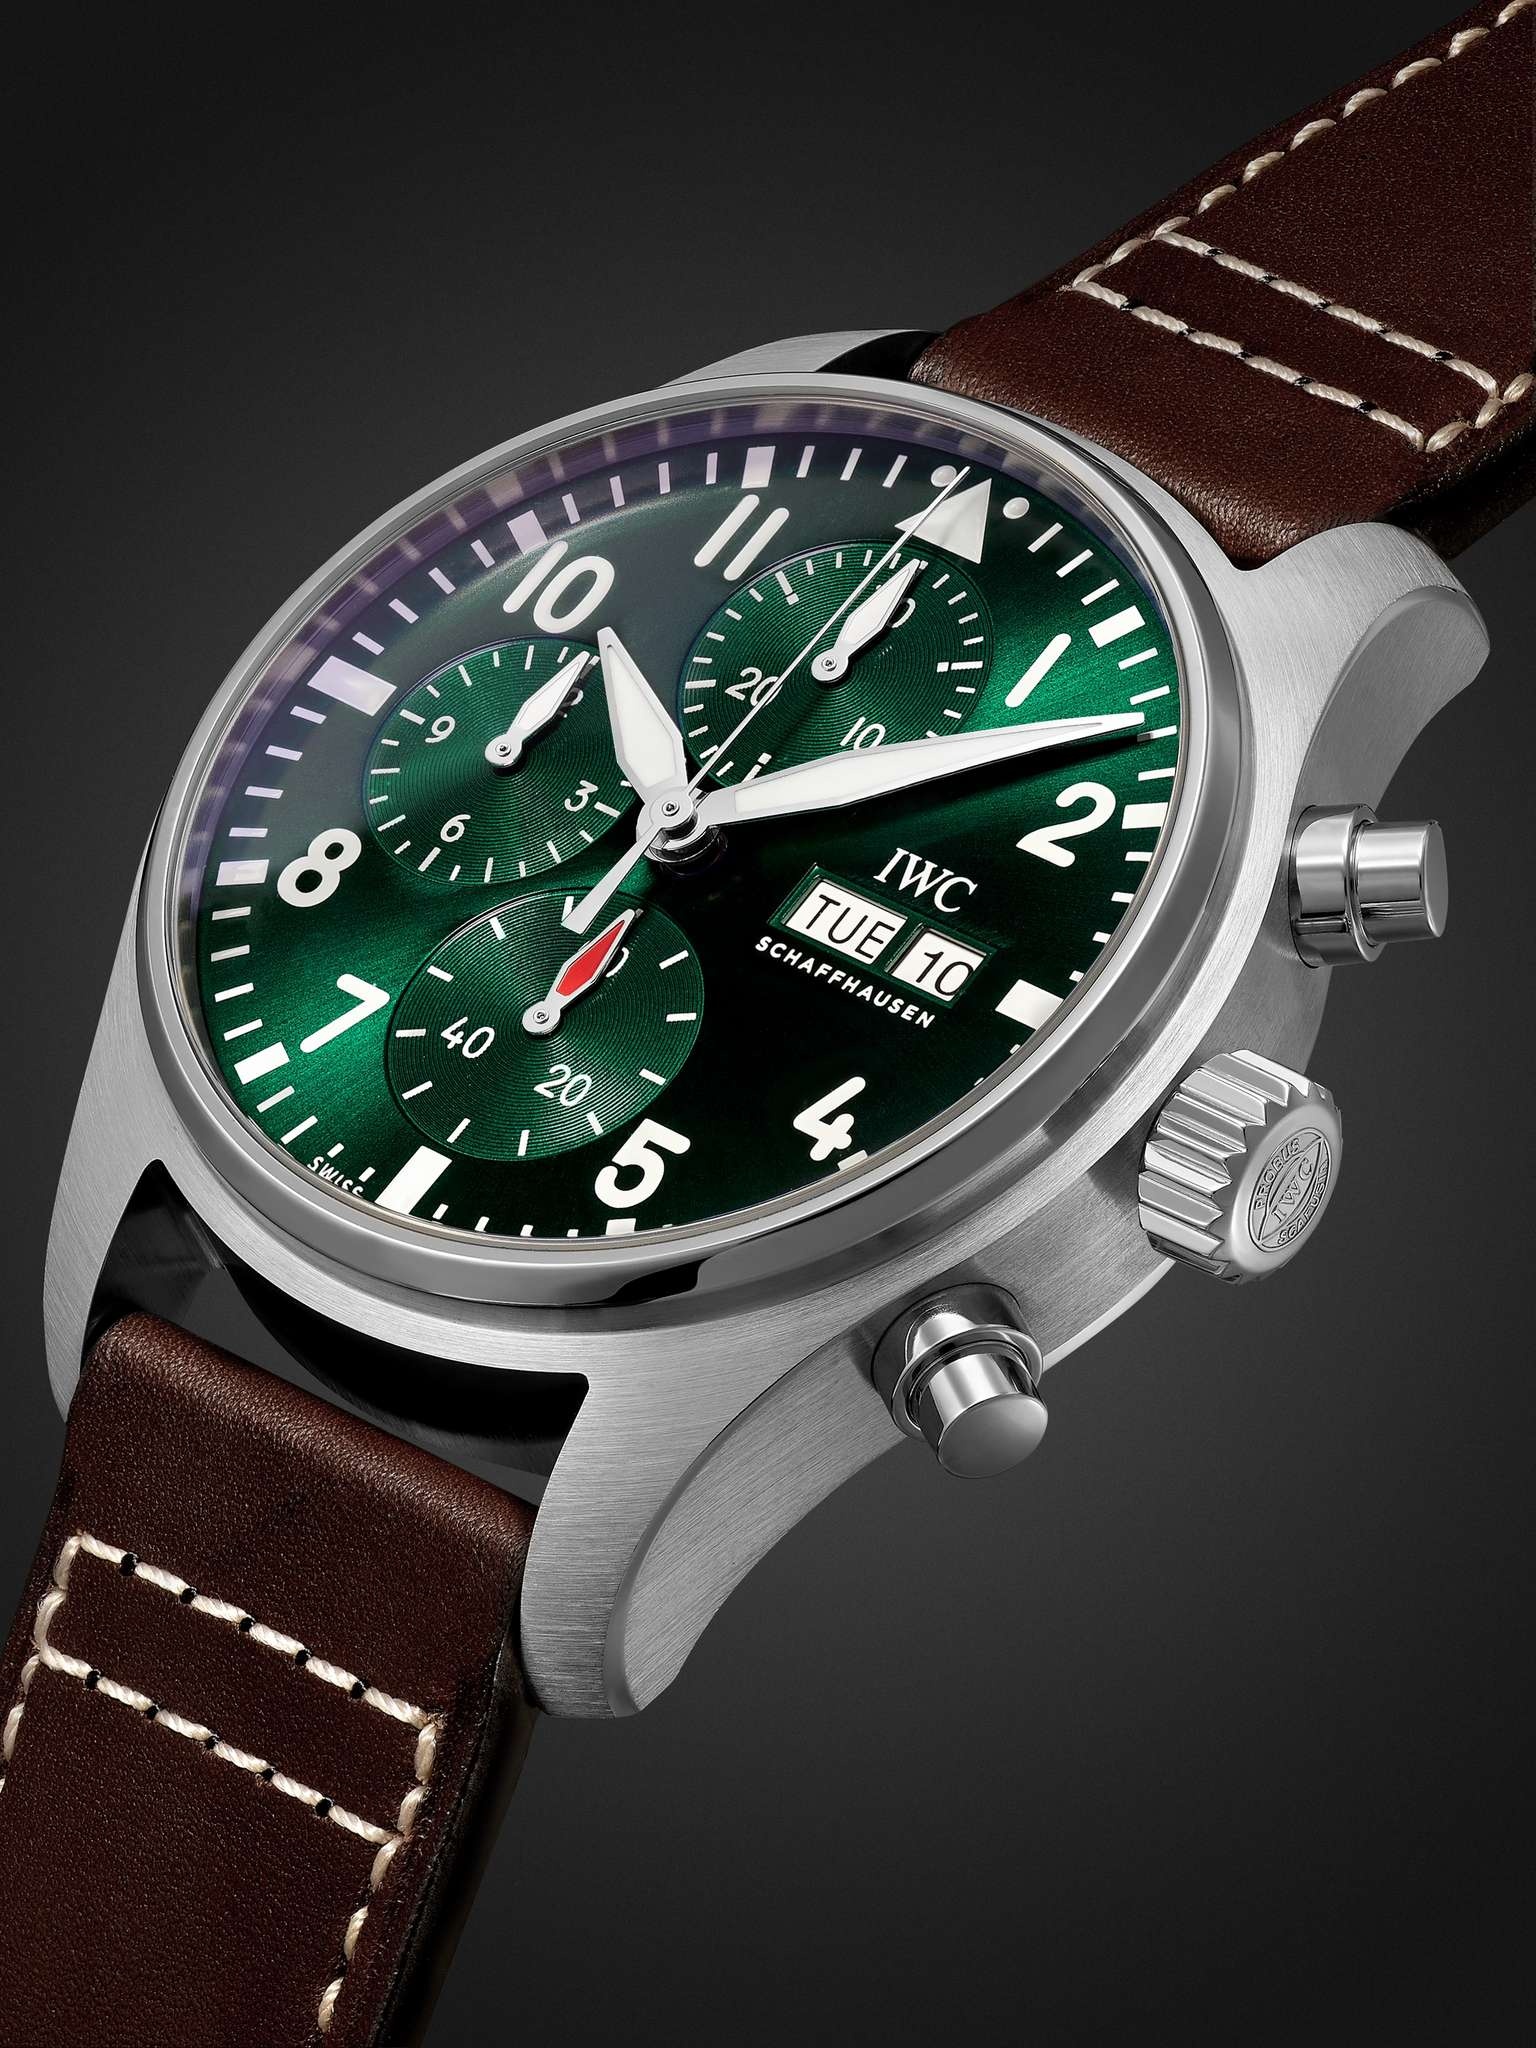 Pilot's Automatic Chronograph 41mm Stainless Steel and Leather Watch, Ref. No. IW388103 - 4